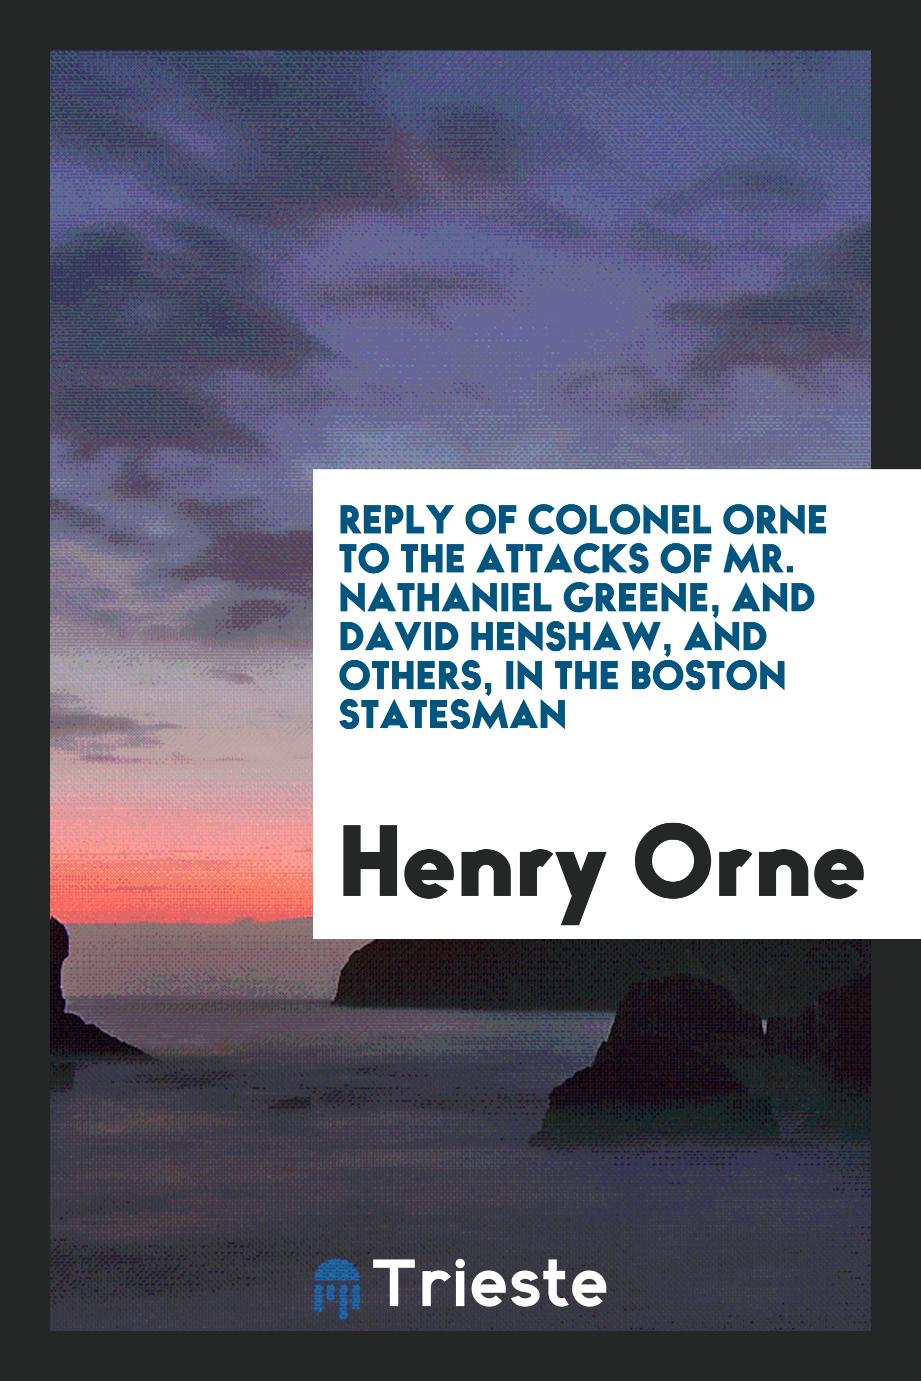 Reply of Colonel Orne to the Attacks of Mr. Nathaniel Greene, and David Henshaw, and Others, in the Boston Statesman